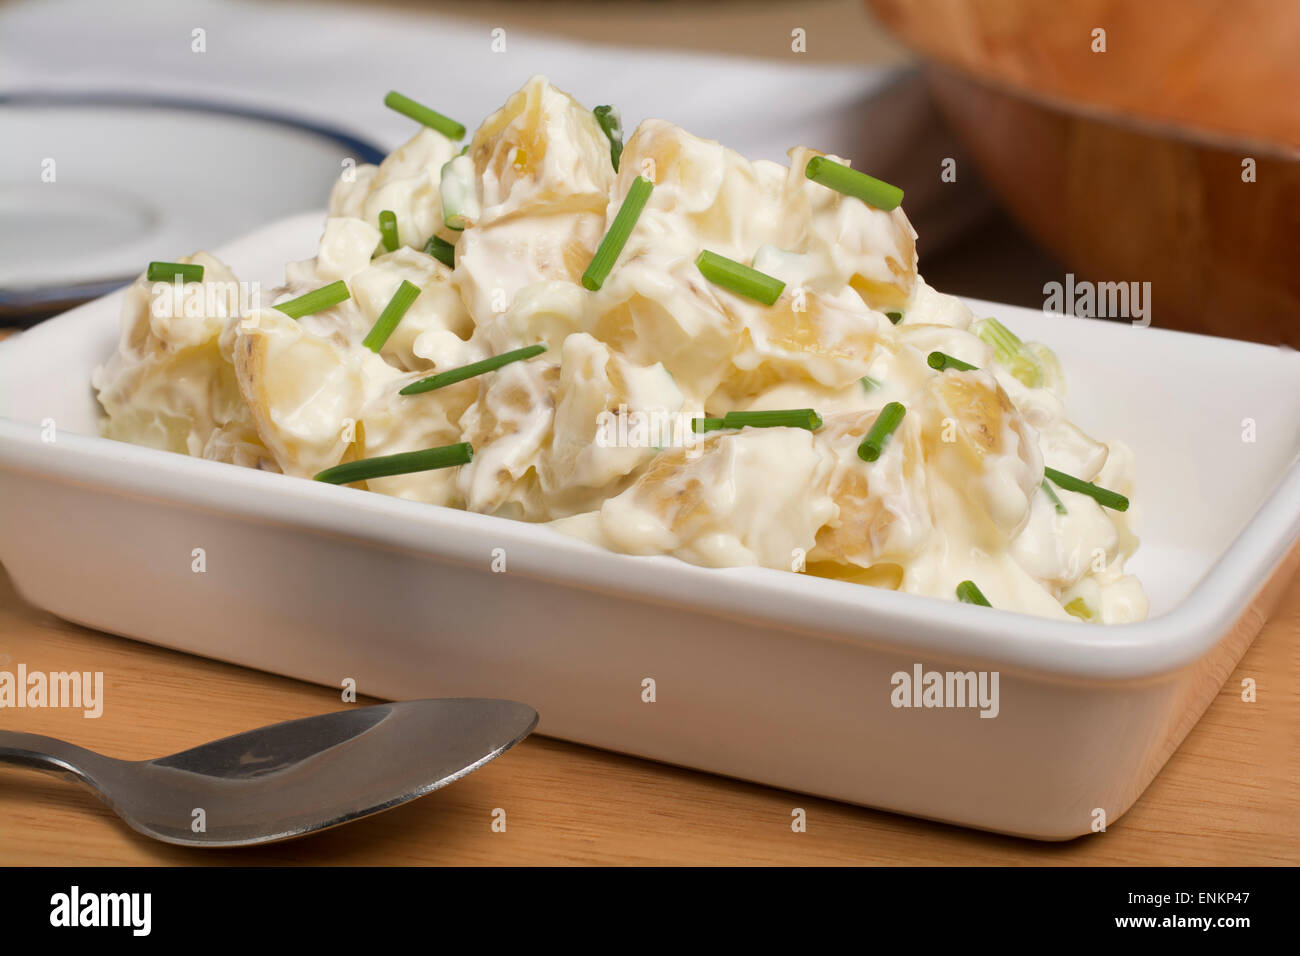 Potato salad made with baby potatoes, spring onions, mayonnaise and sprinkled with chives Stock Photo